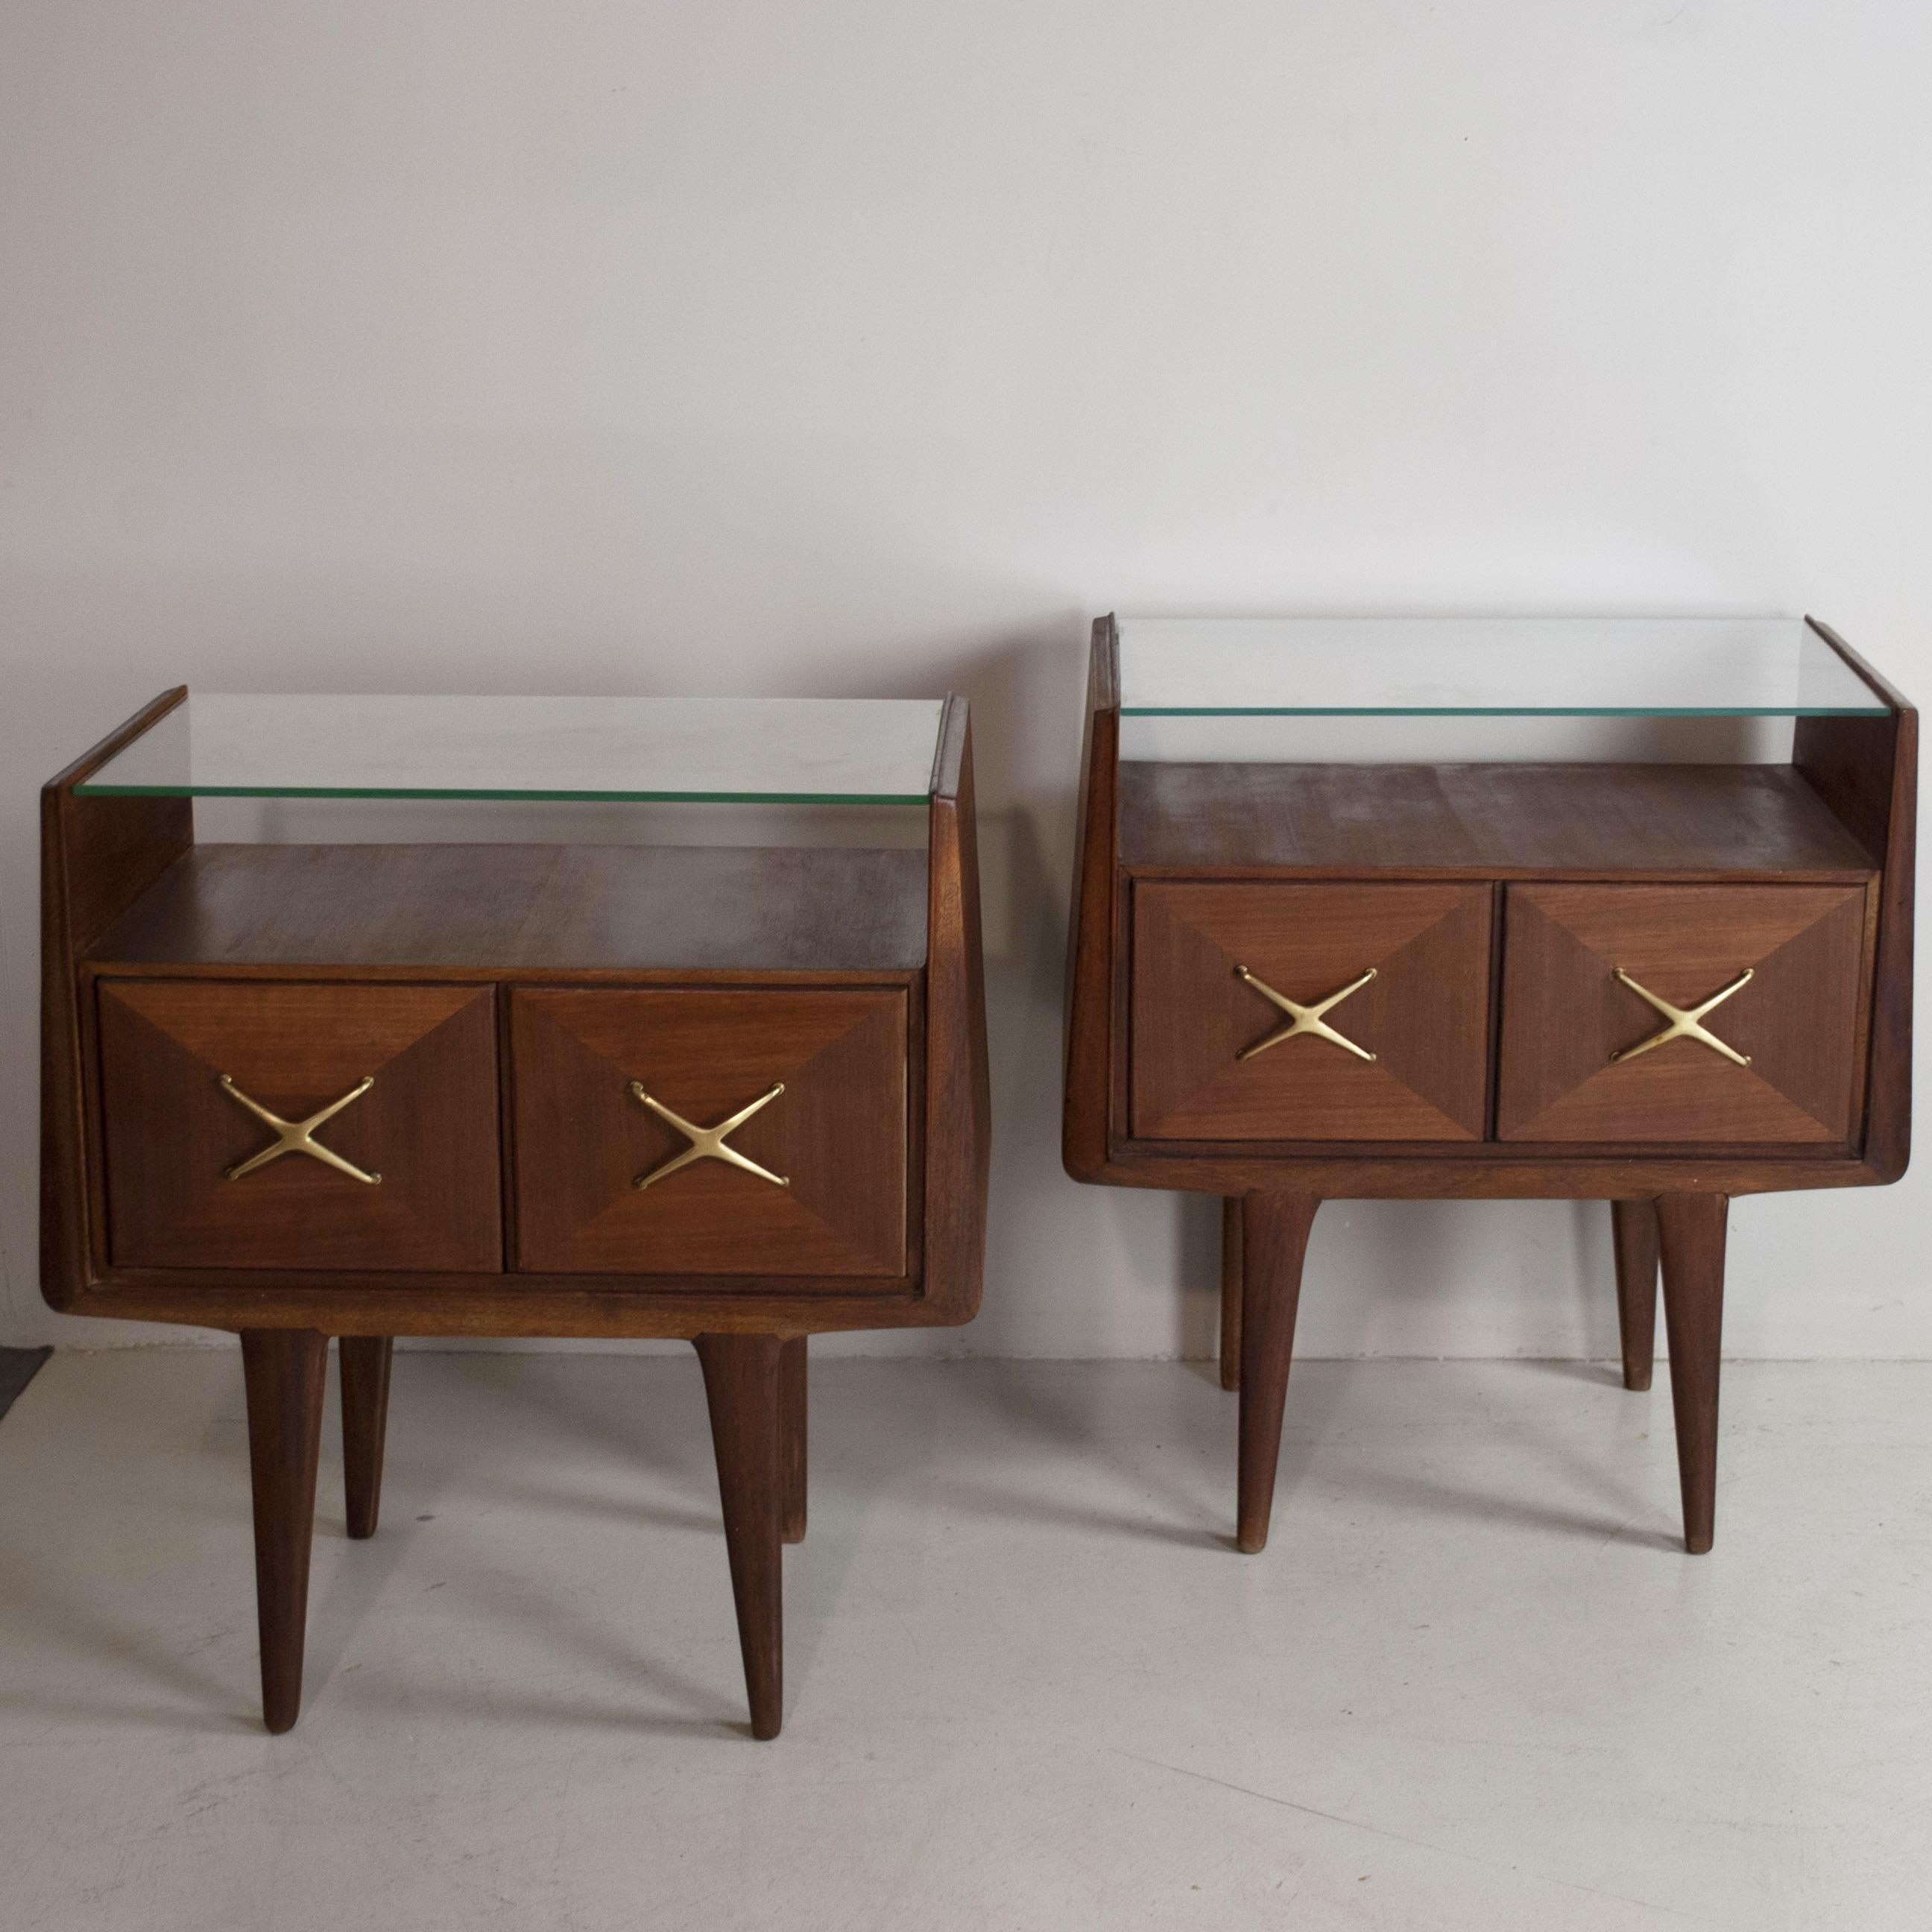 Pair of wooden bedside tables with glass top and brass handles produced by Gio Ponti for La Permanente Mobili di Cantù 50s.